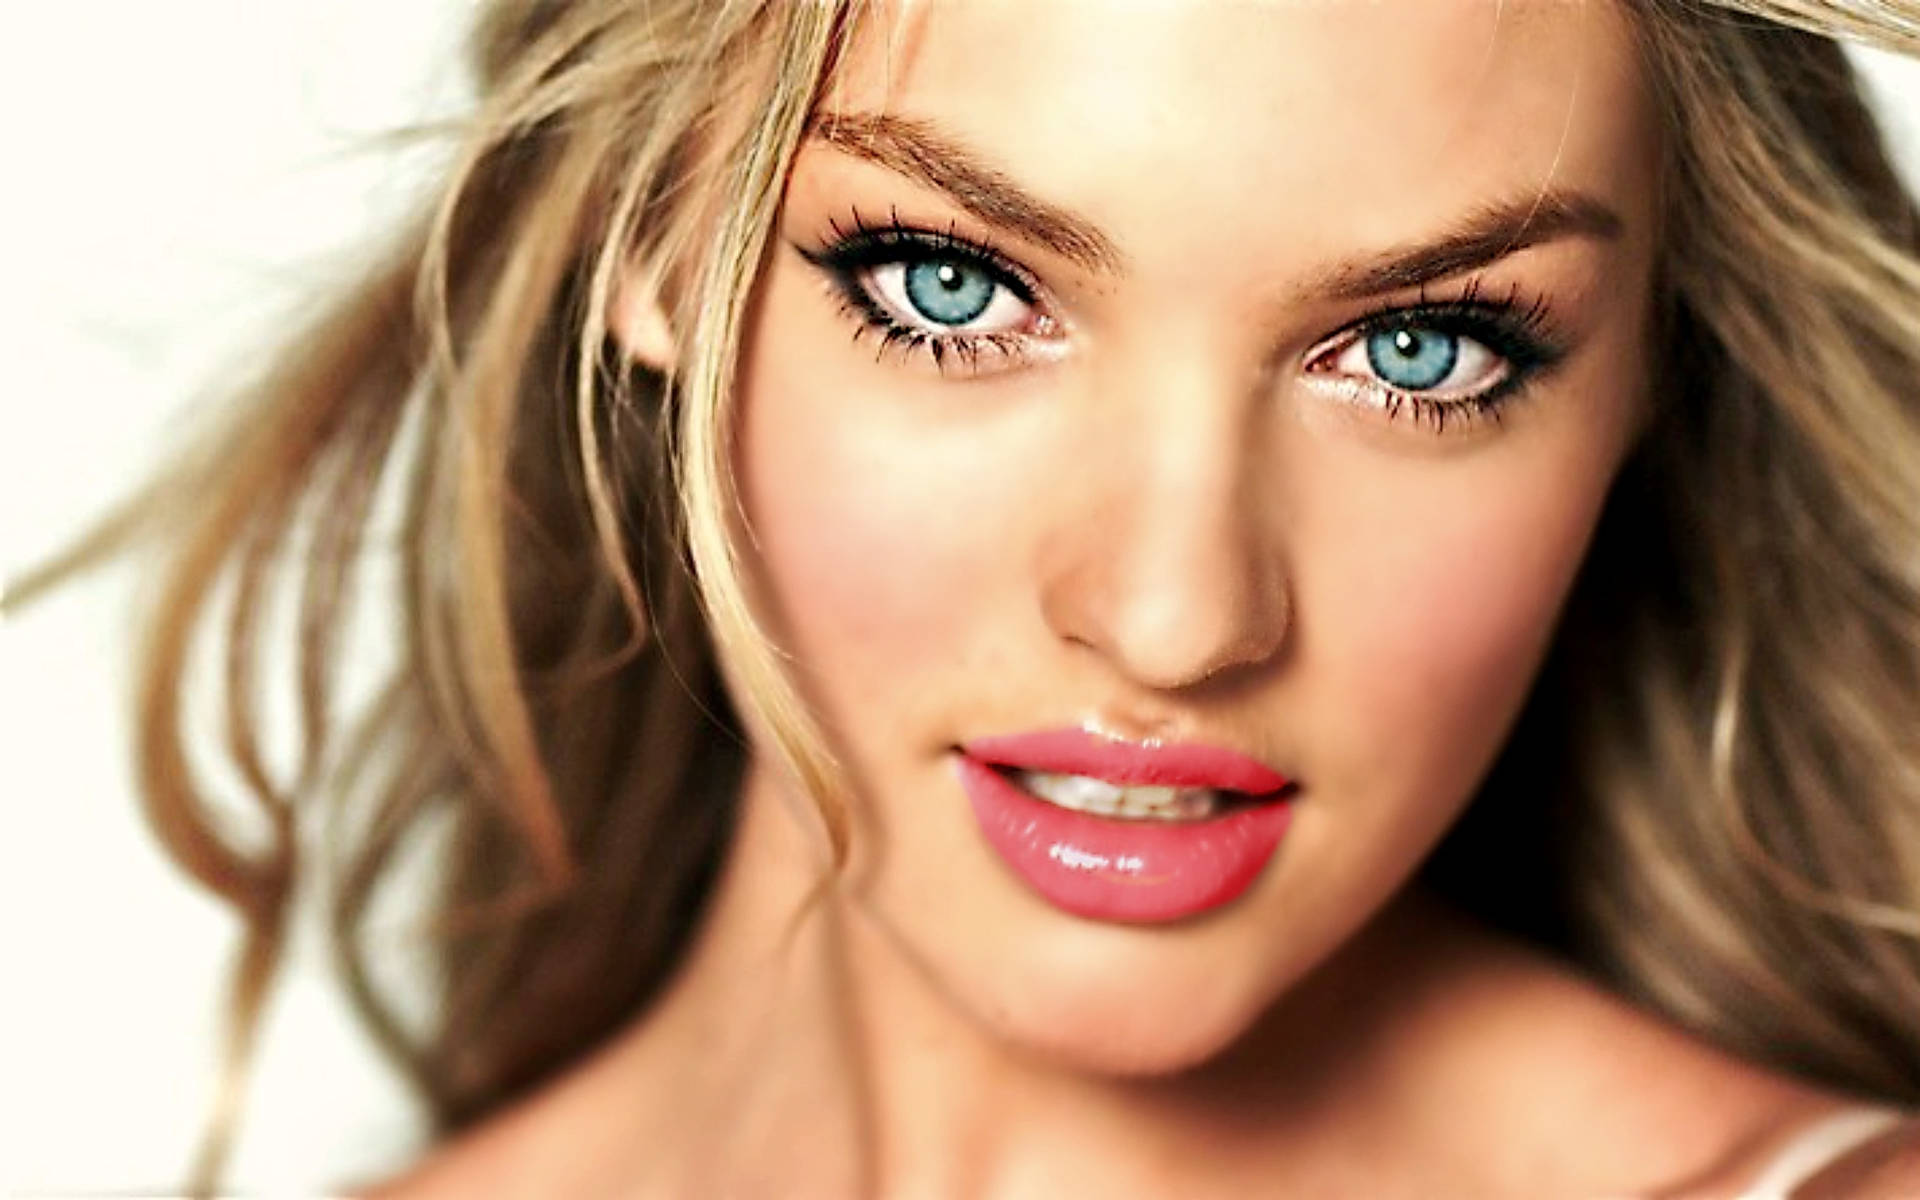 Candice Swanepoel Profile Photography Wallpaper